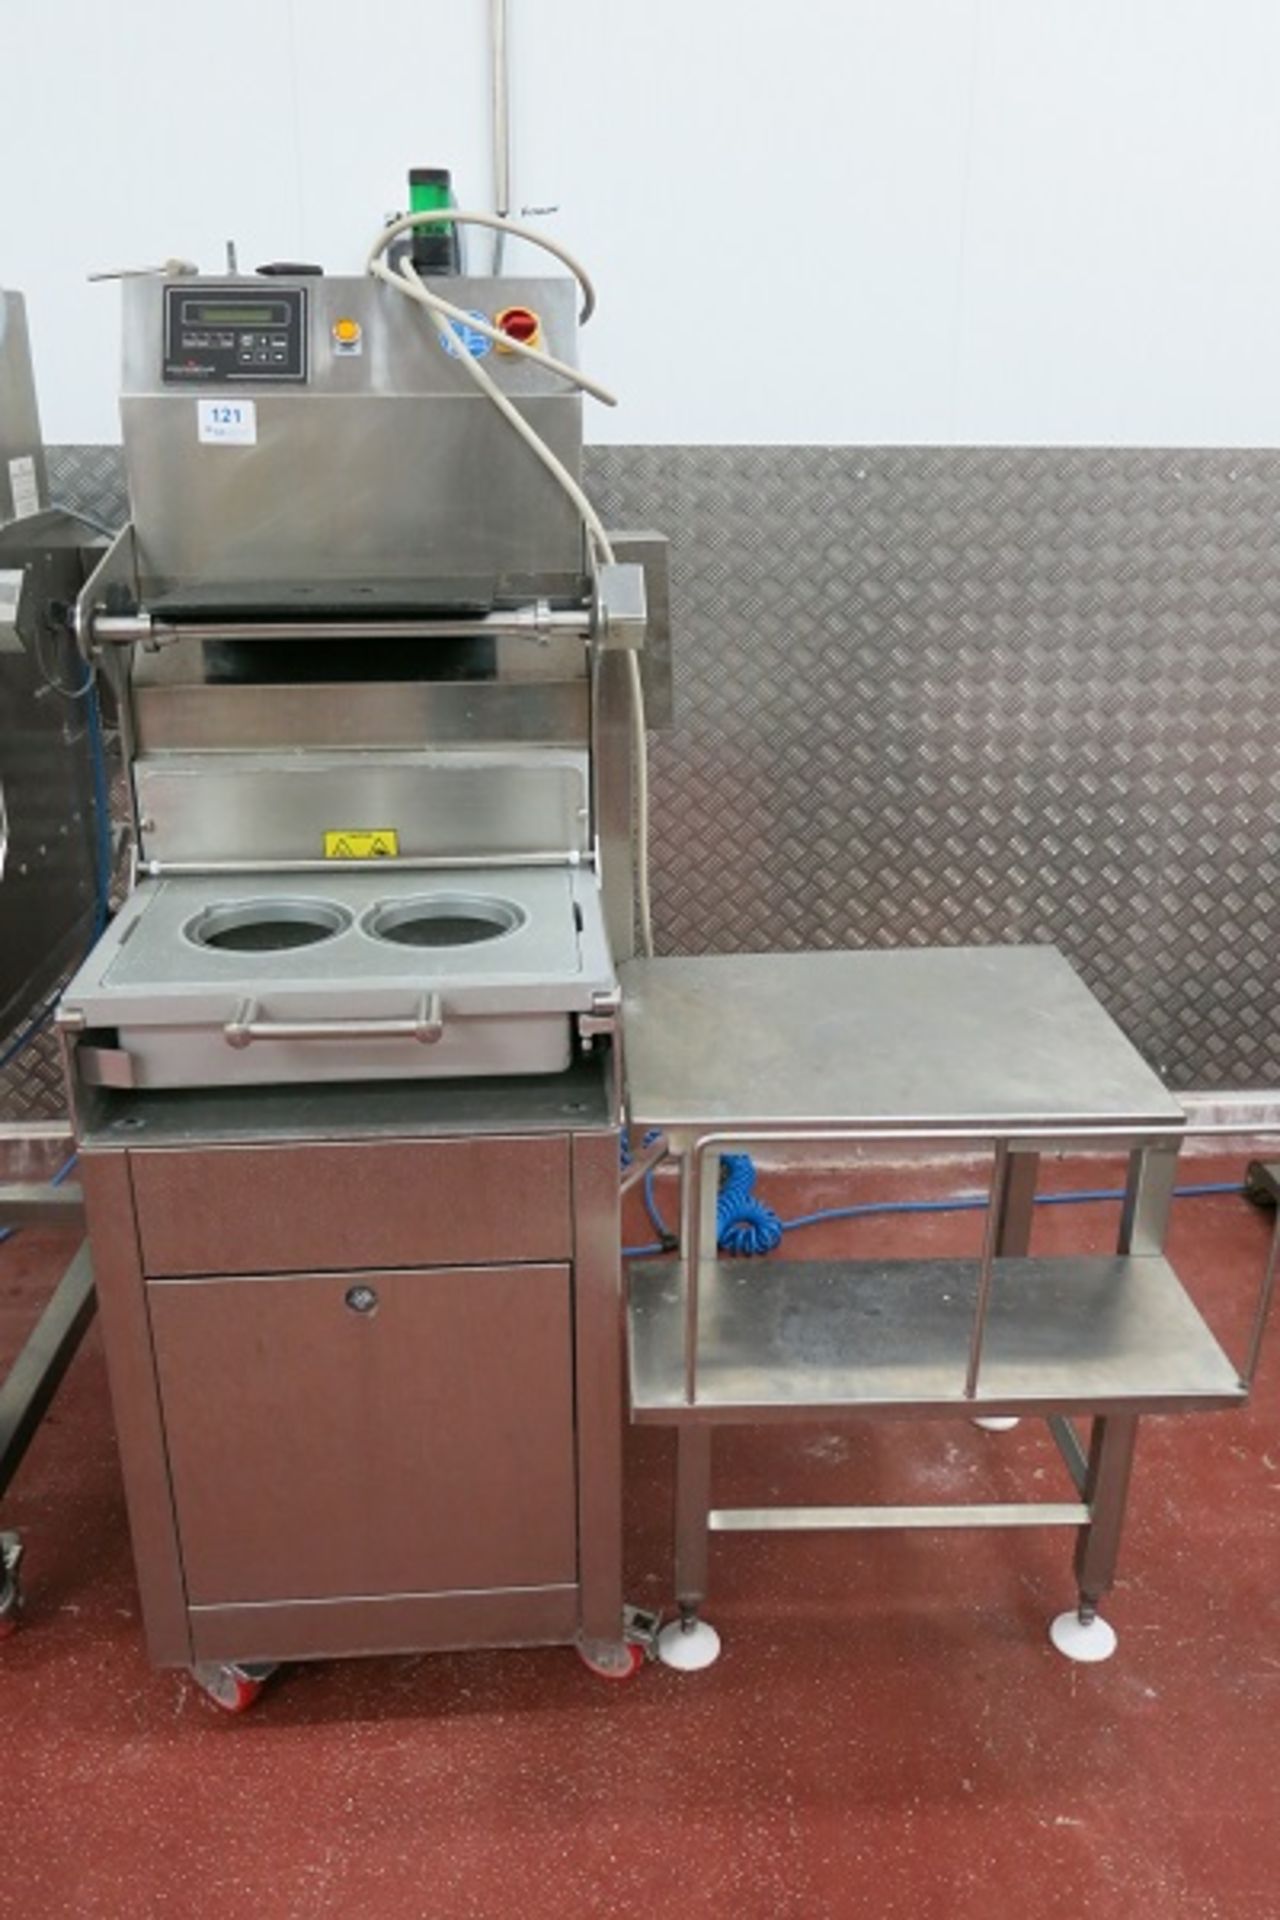 Promens Model 511 VGM sealing machine - A lift out charge will apply